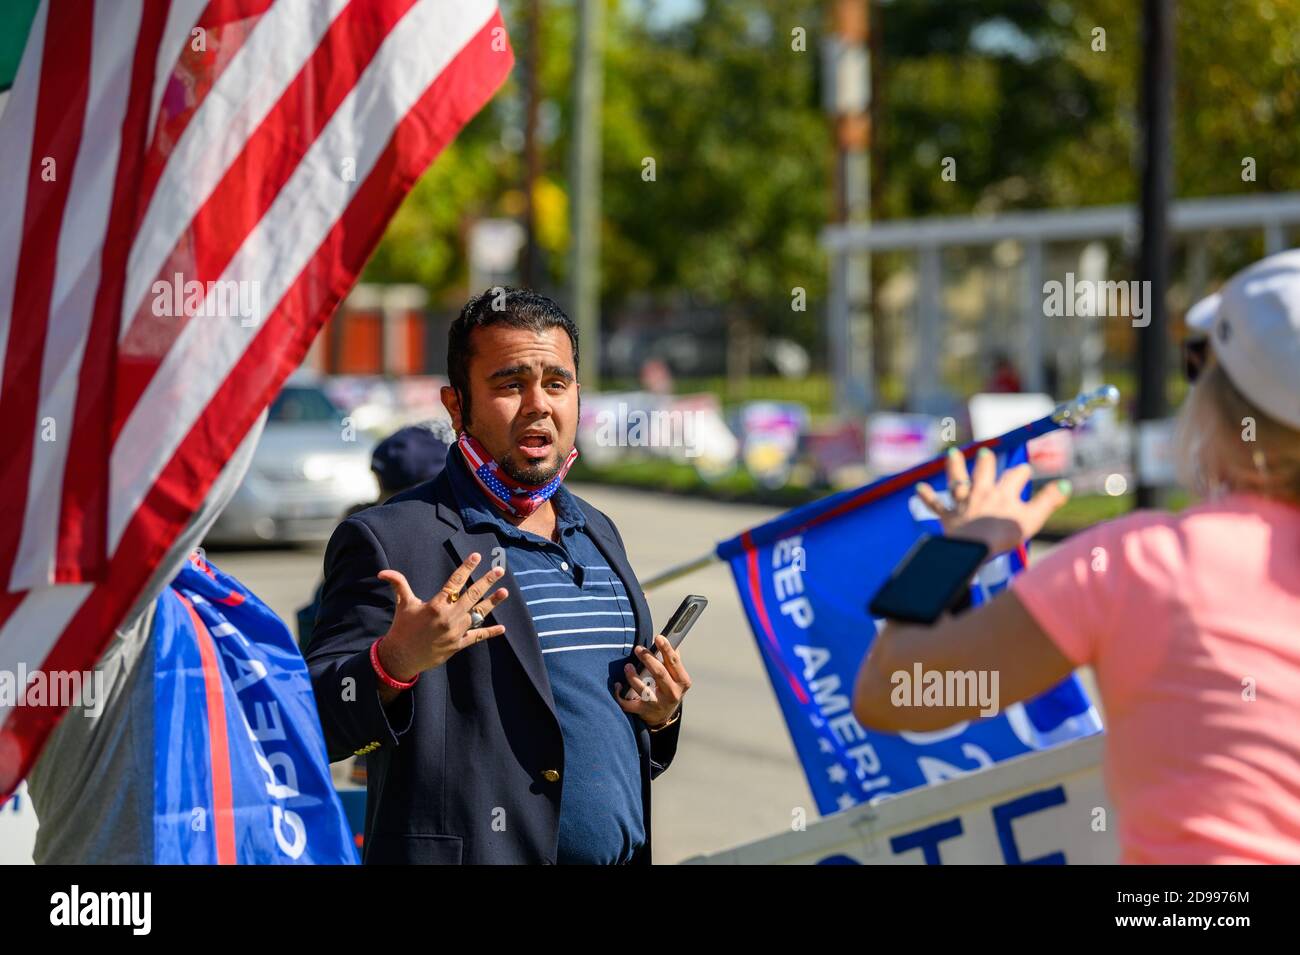 Houston, Texas, USA. 3rd Nov, 2020. A Donald Trump supporter confronts a volunteer holding anti-Trump signs outside polling station in Harris County, Houston, Texas, USA. Credit: Michelmond/Alamy Live News. Stock Photo